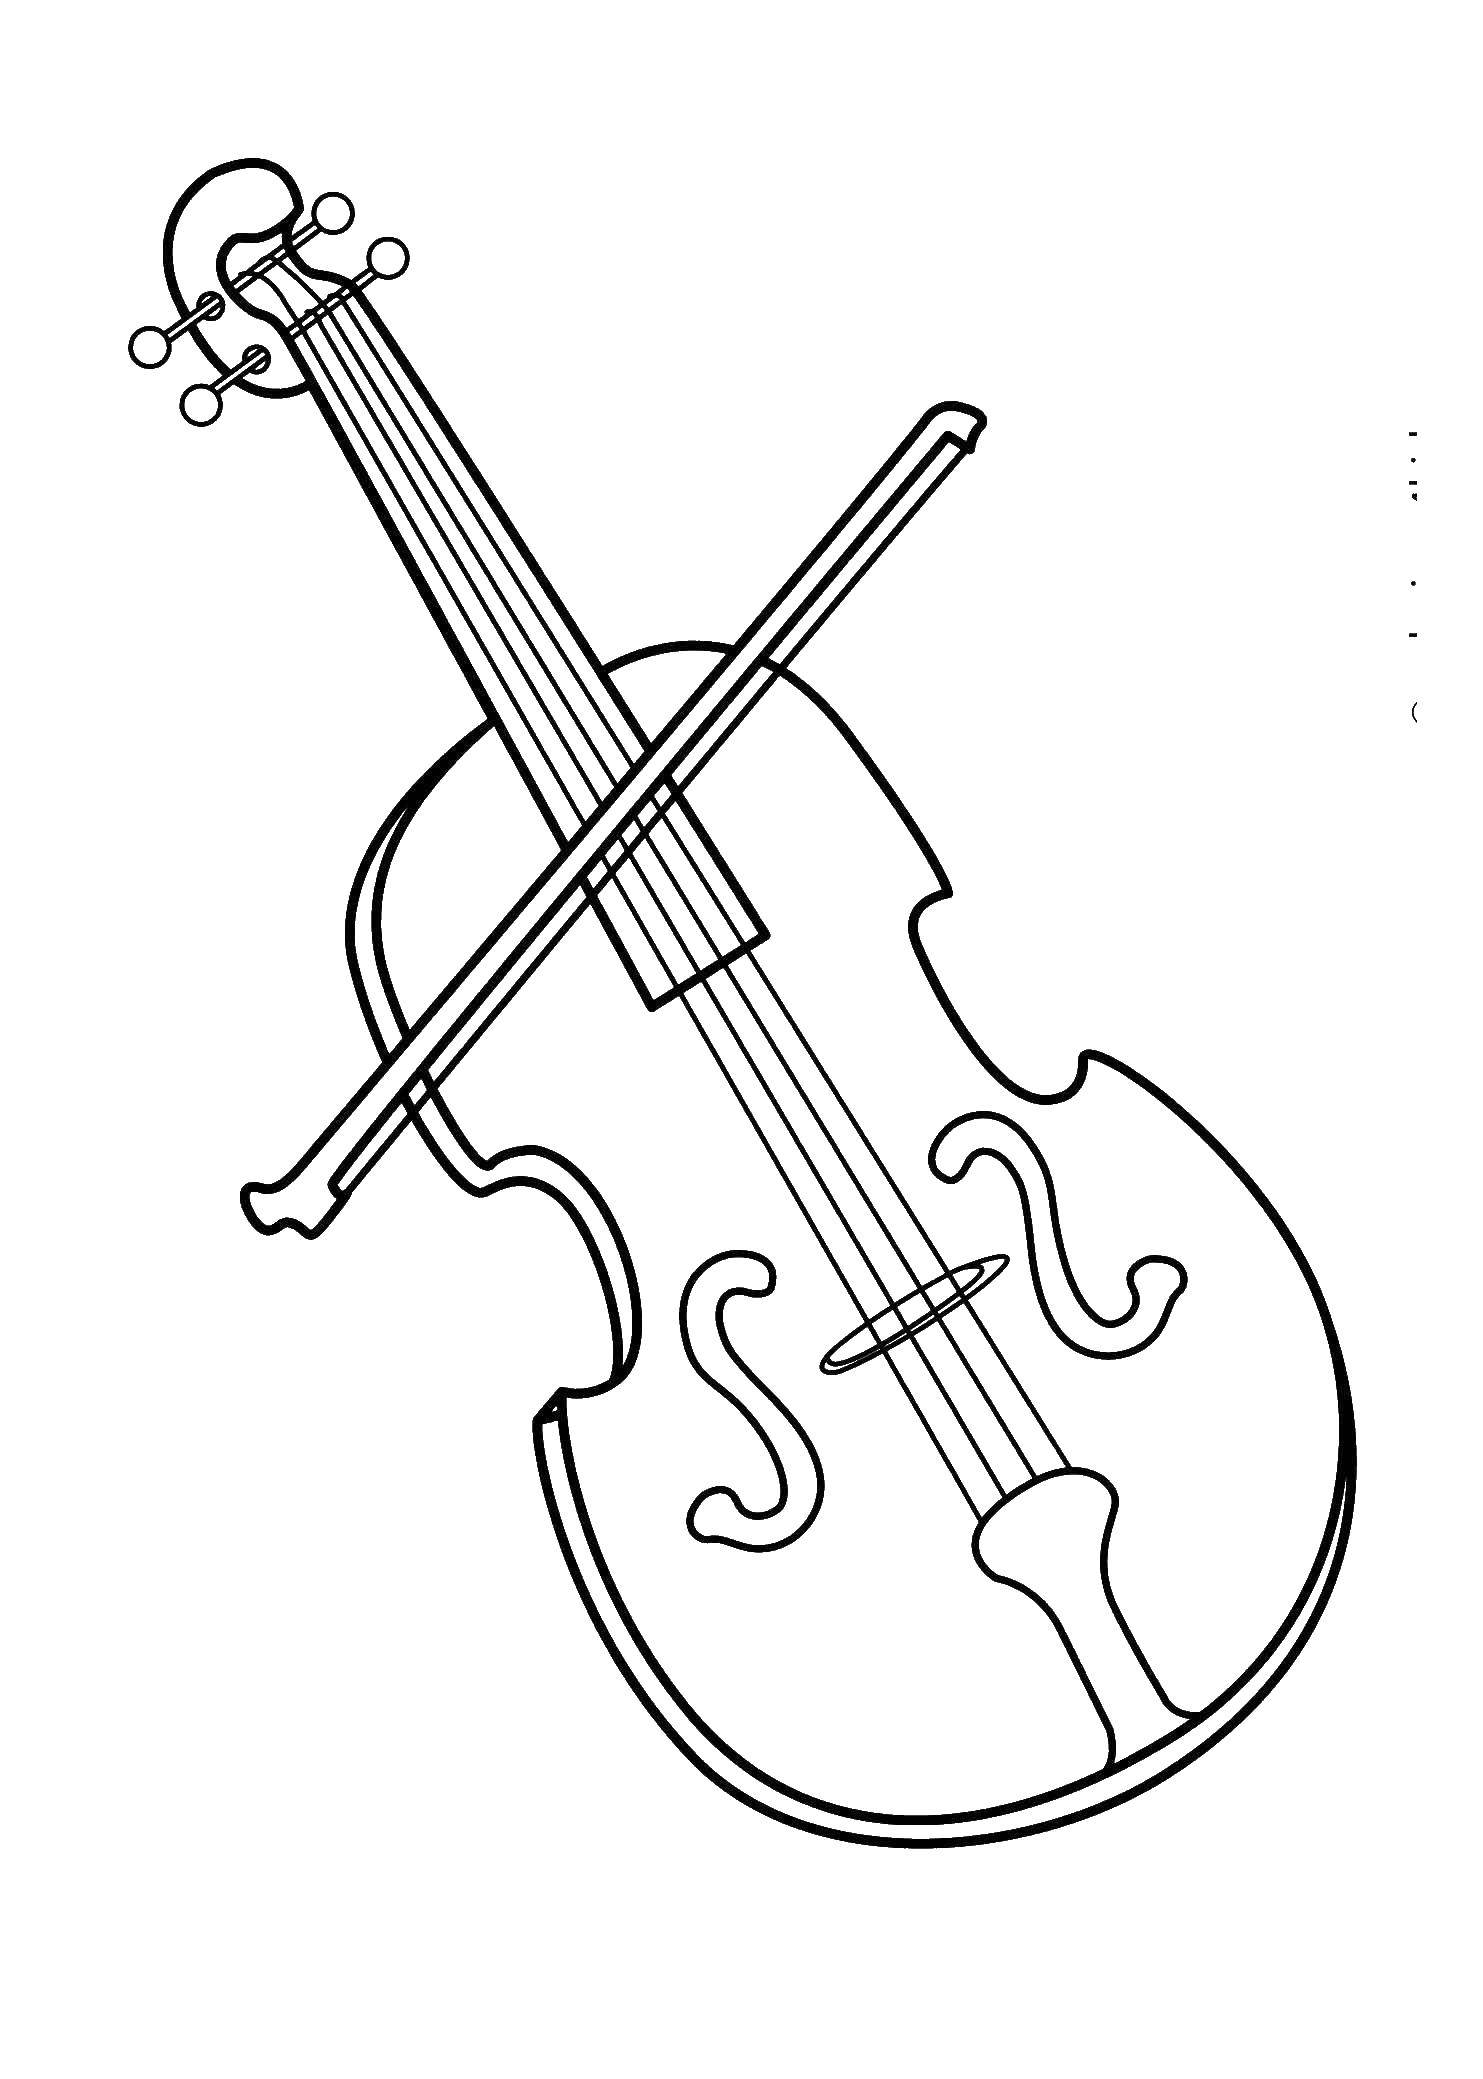 Coloring Cello. Category Musical instrument. Tags:  cello.